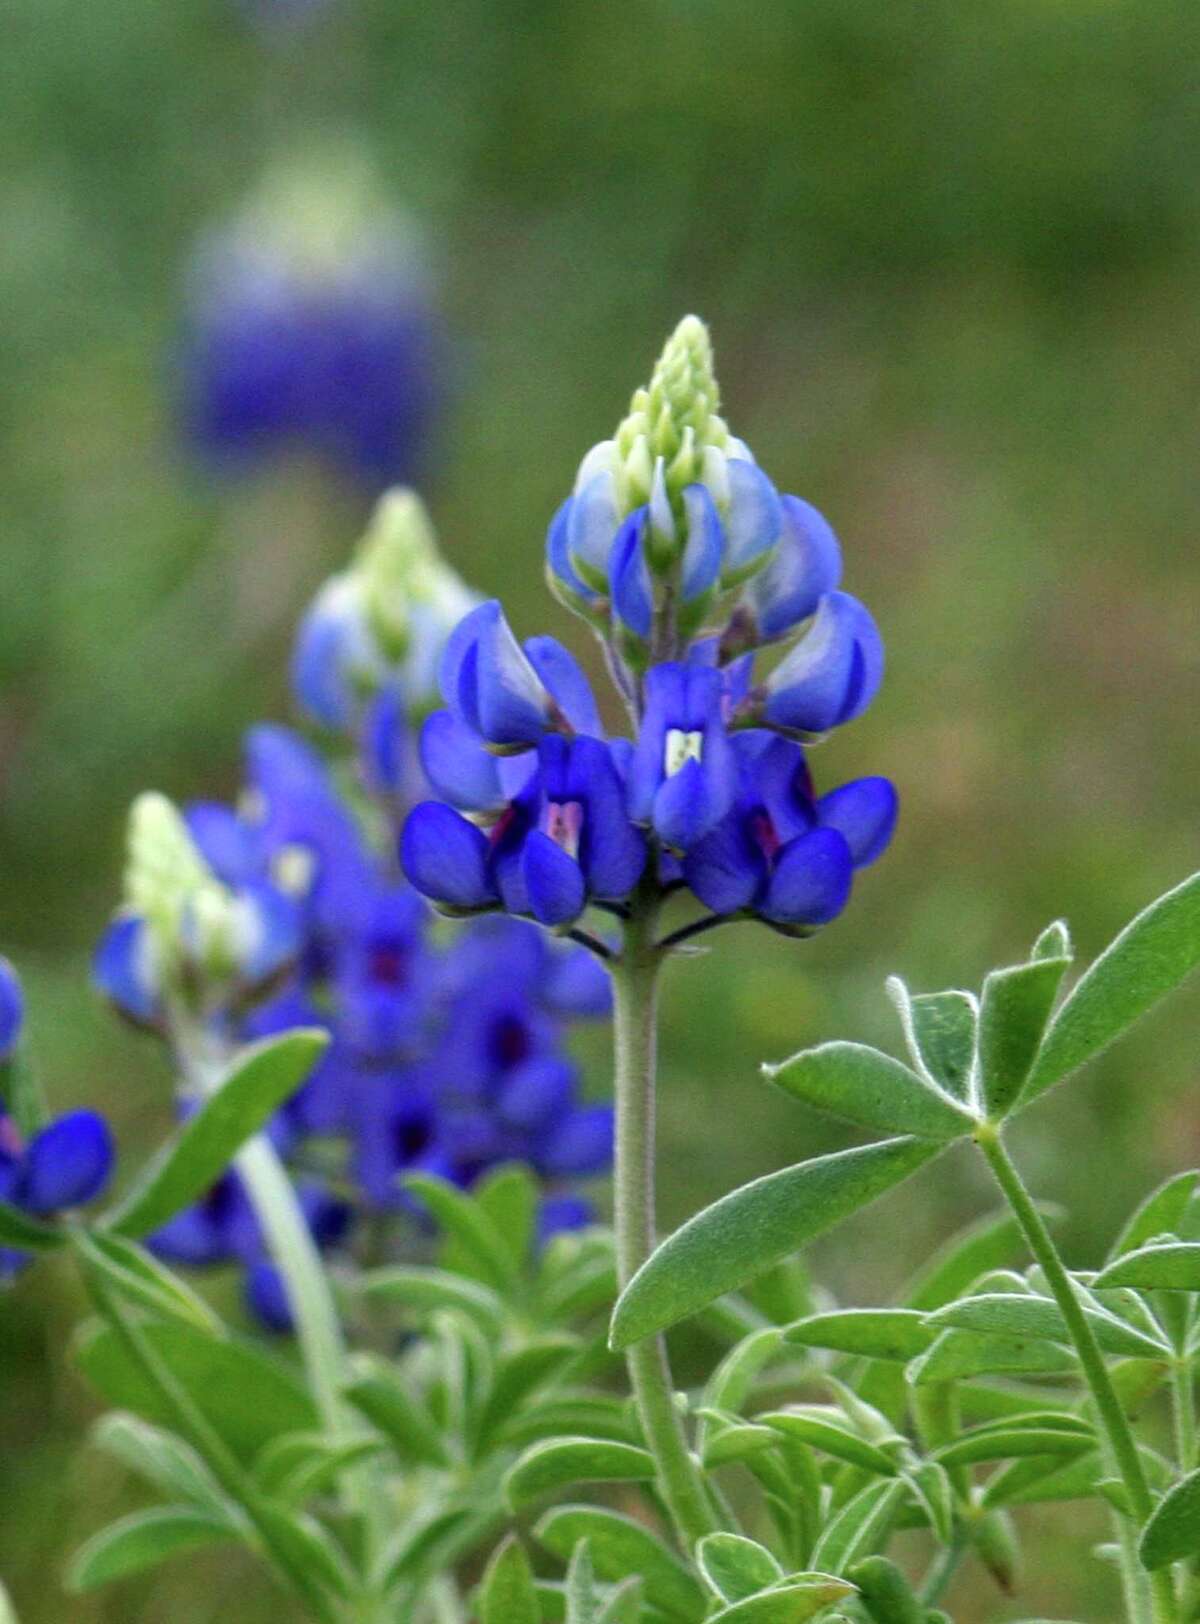 In this file photo from March 26, 2009, bluebonnets were in bloom near T.C. Jester at 11th Street and White Oak Bayou.